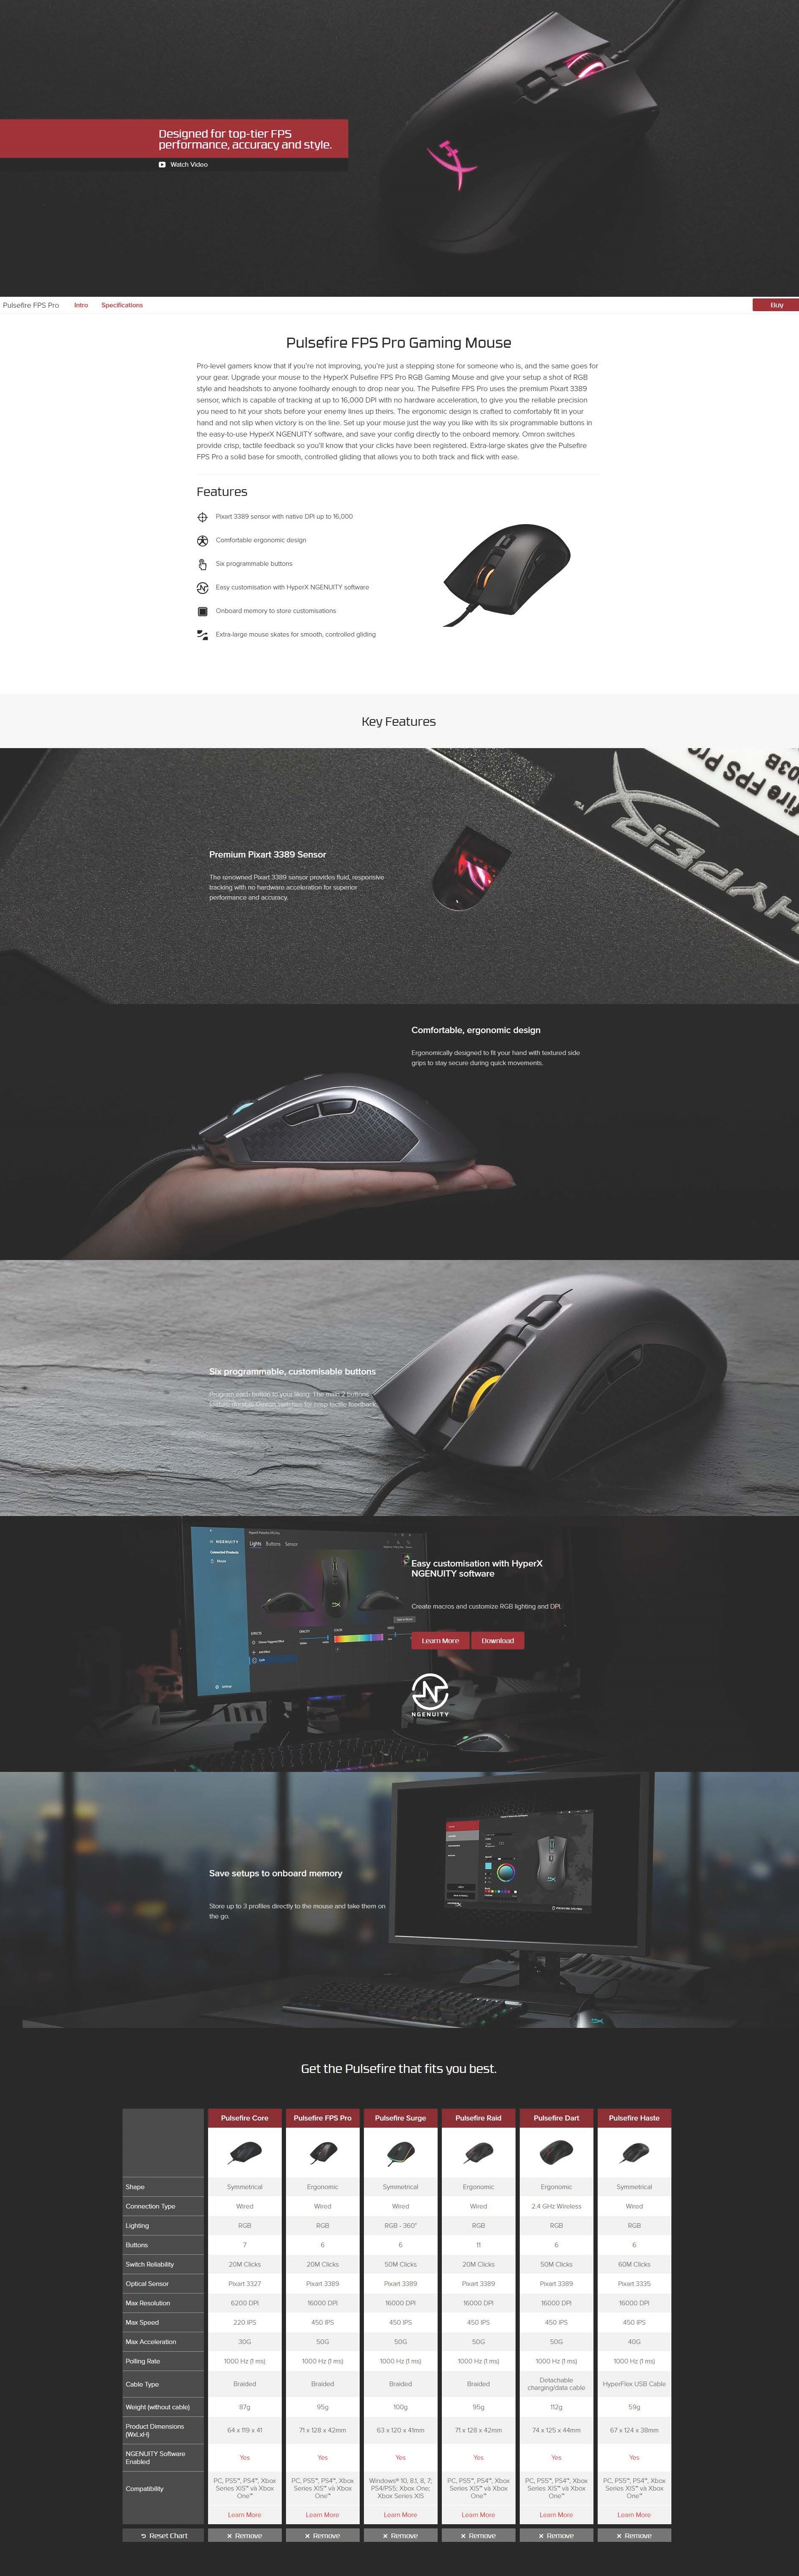 A large marketing image providing additional information about the product HyperX Pulsefire FPS Pro Grey Wired Gaming Mouse - Additional alt info not provided